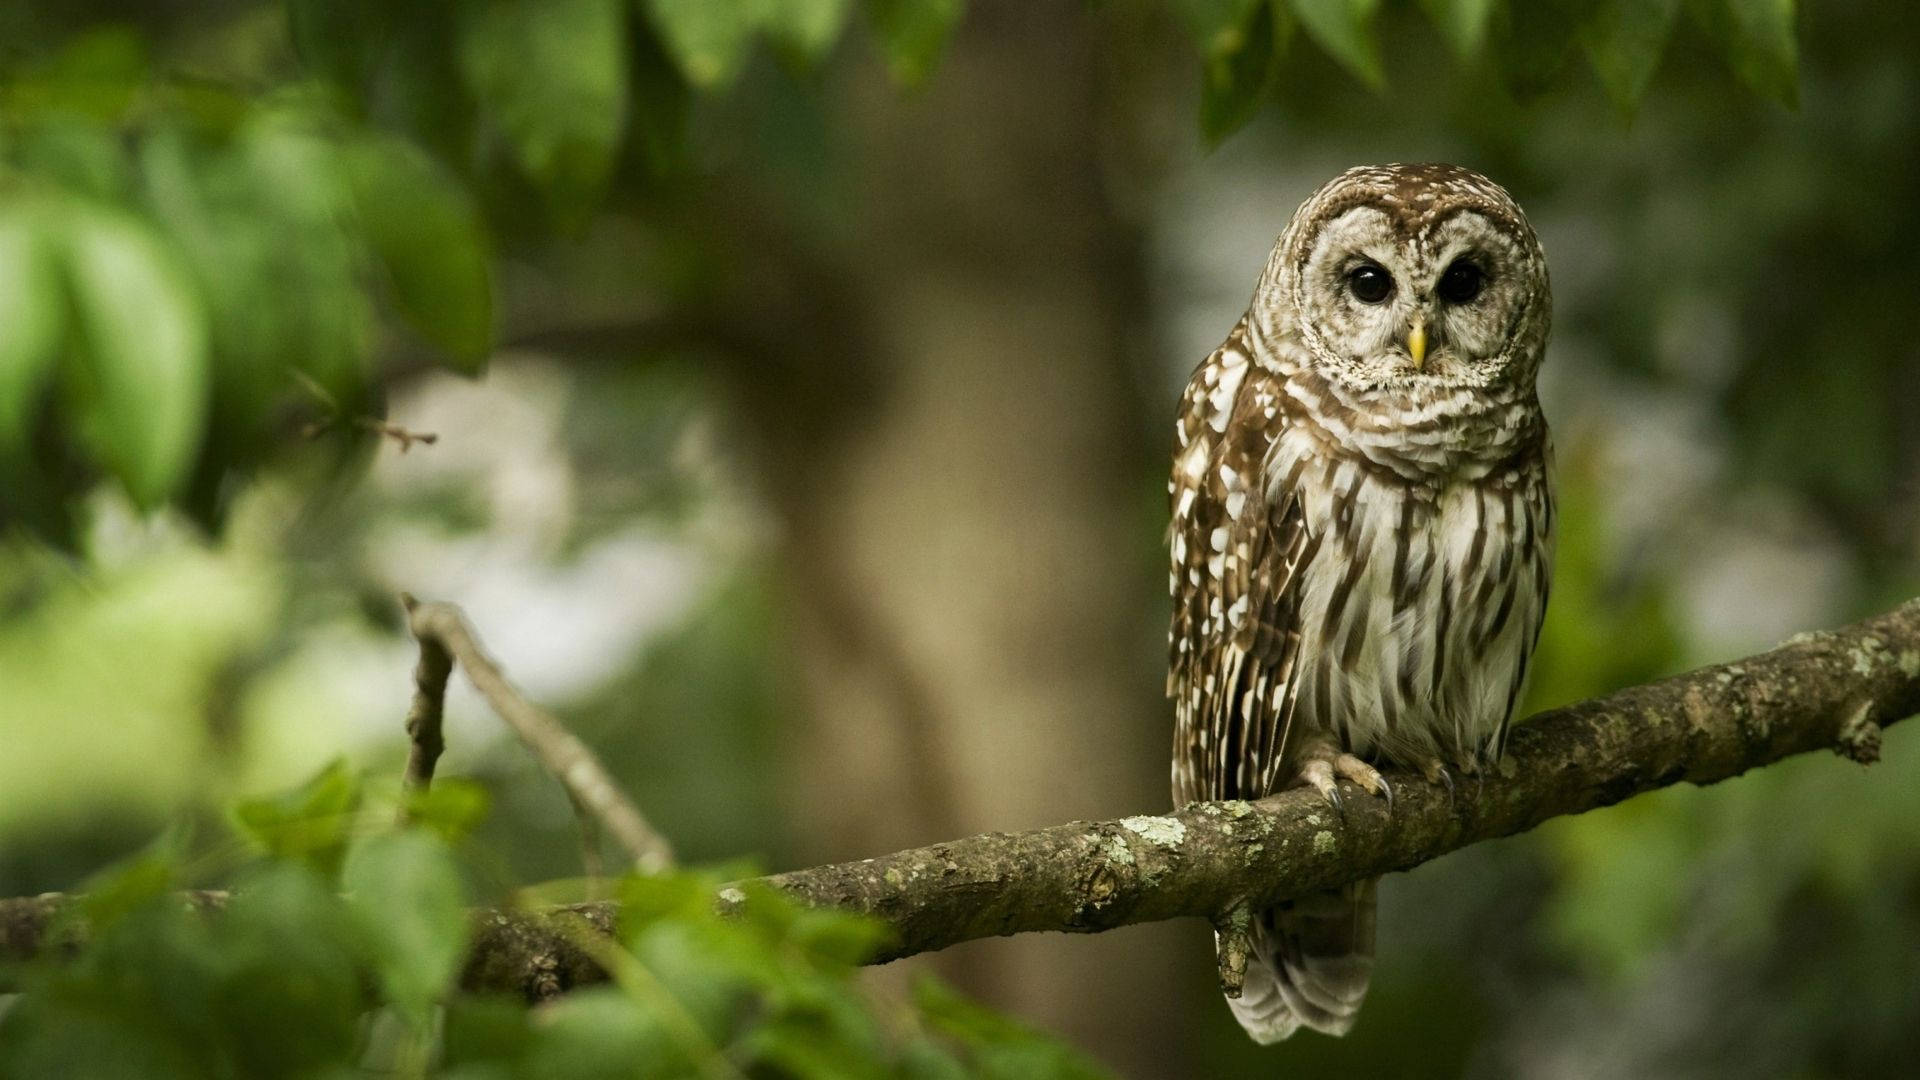 Caption: Baby Owl Perched On Tree Branch Background